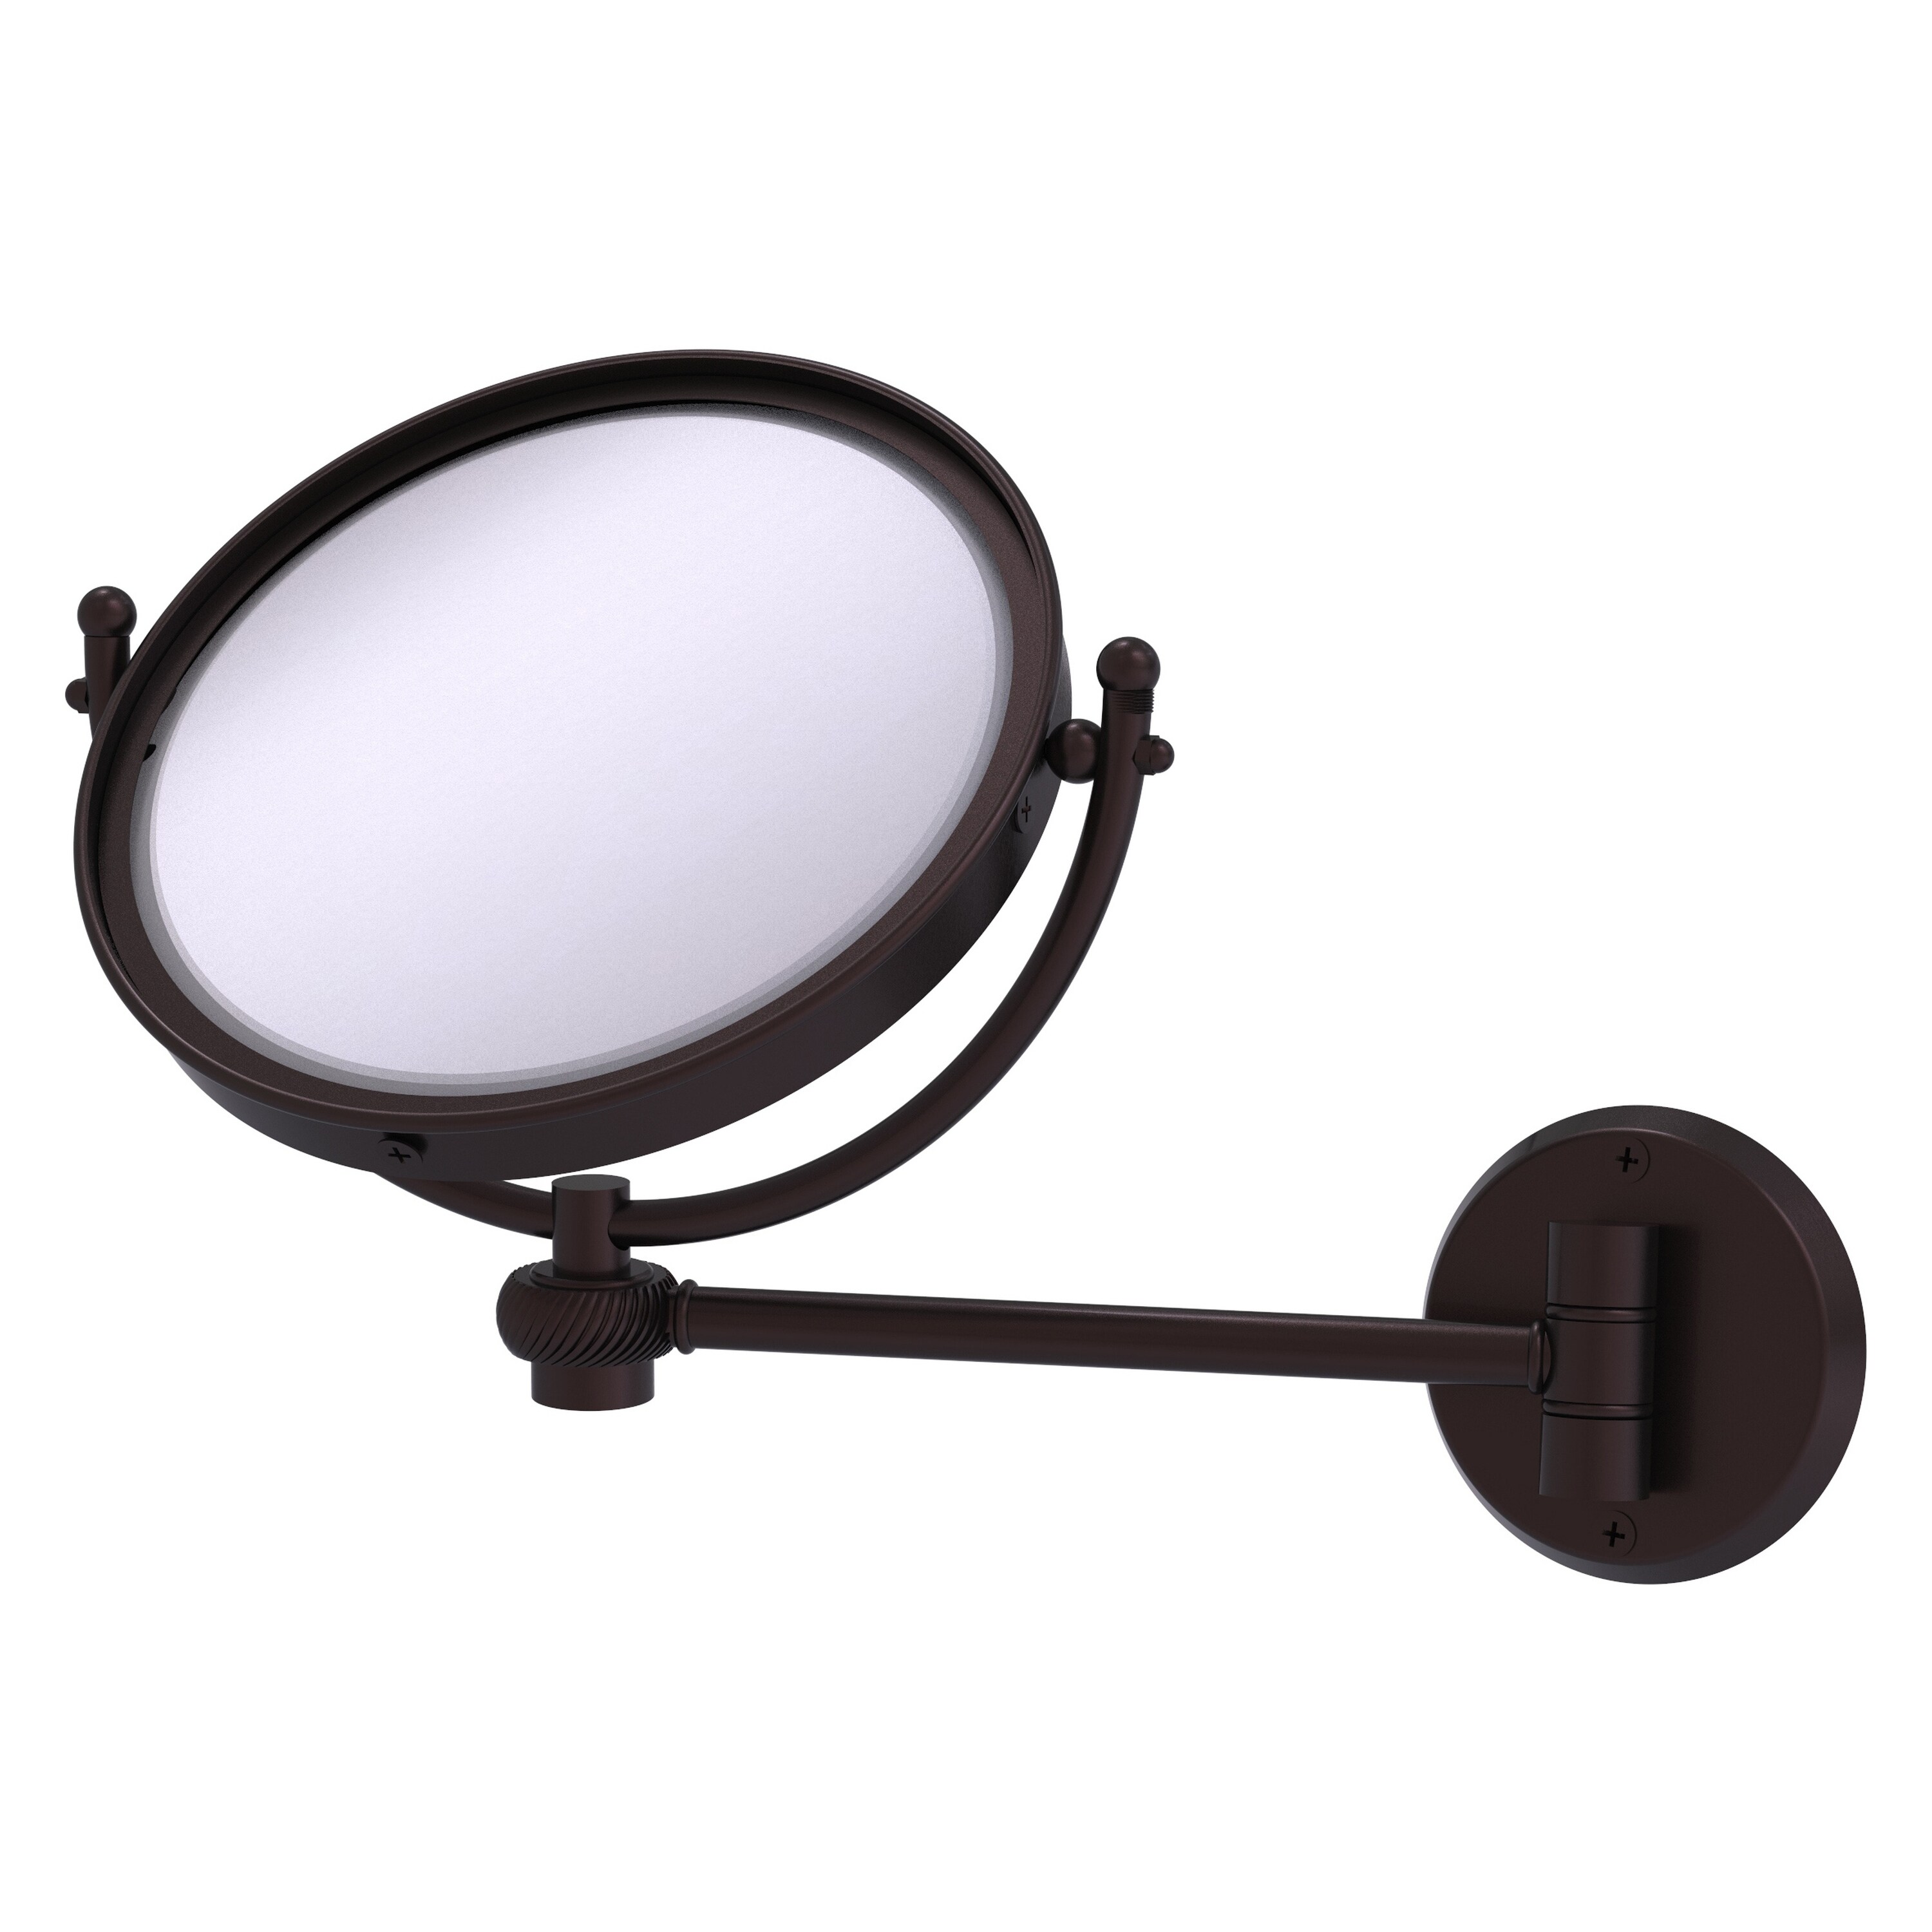 8-in x 10-in Antique Brown Double-sided 5X Magnifying Wall-mounted Vanity Mirror | - Allied Brass WM-5T/5X-ABZ